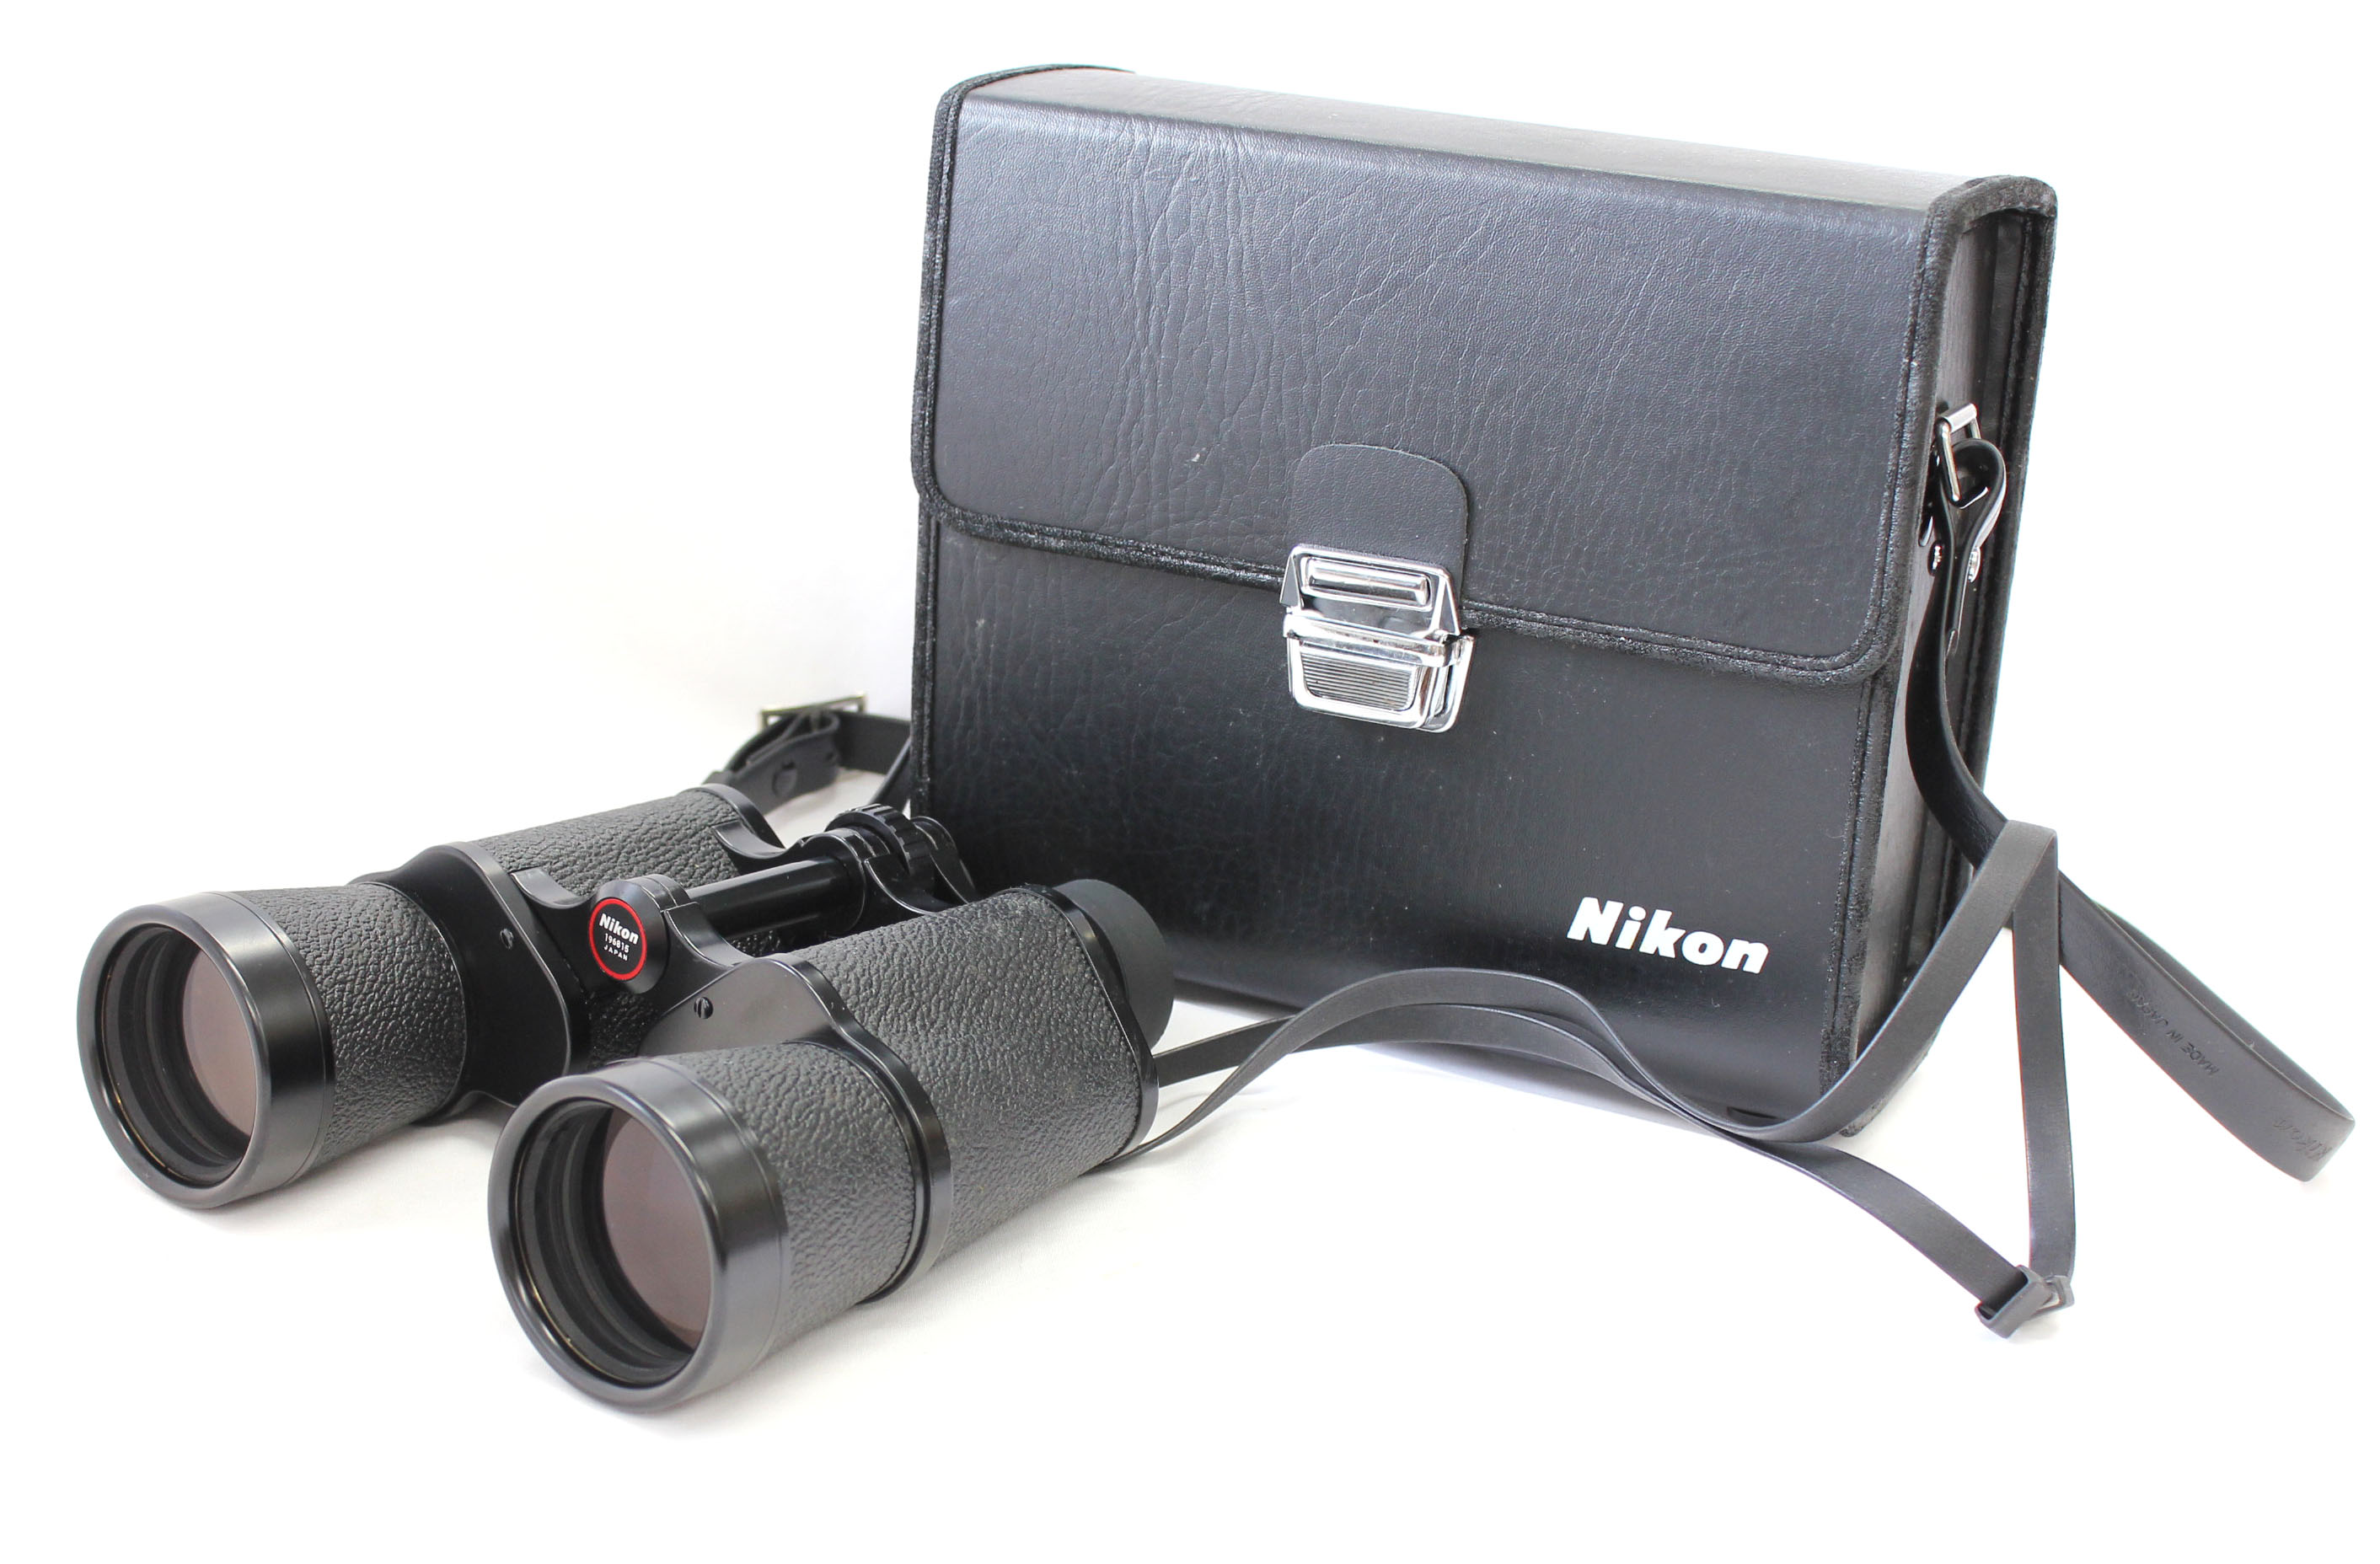 [Excellent++++] Nikon 7x50 7.3° 7.3 Degree Binoculars with Strap and Case from Japan